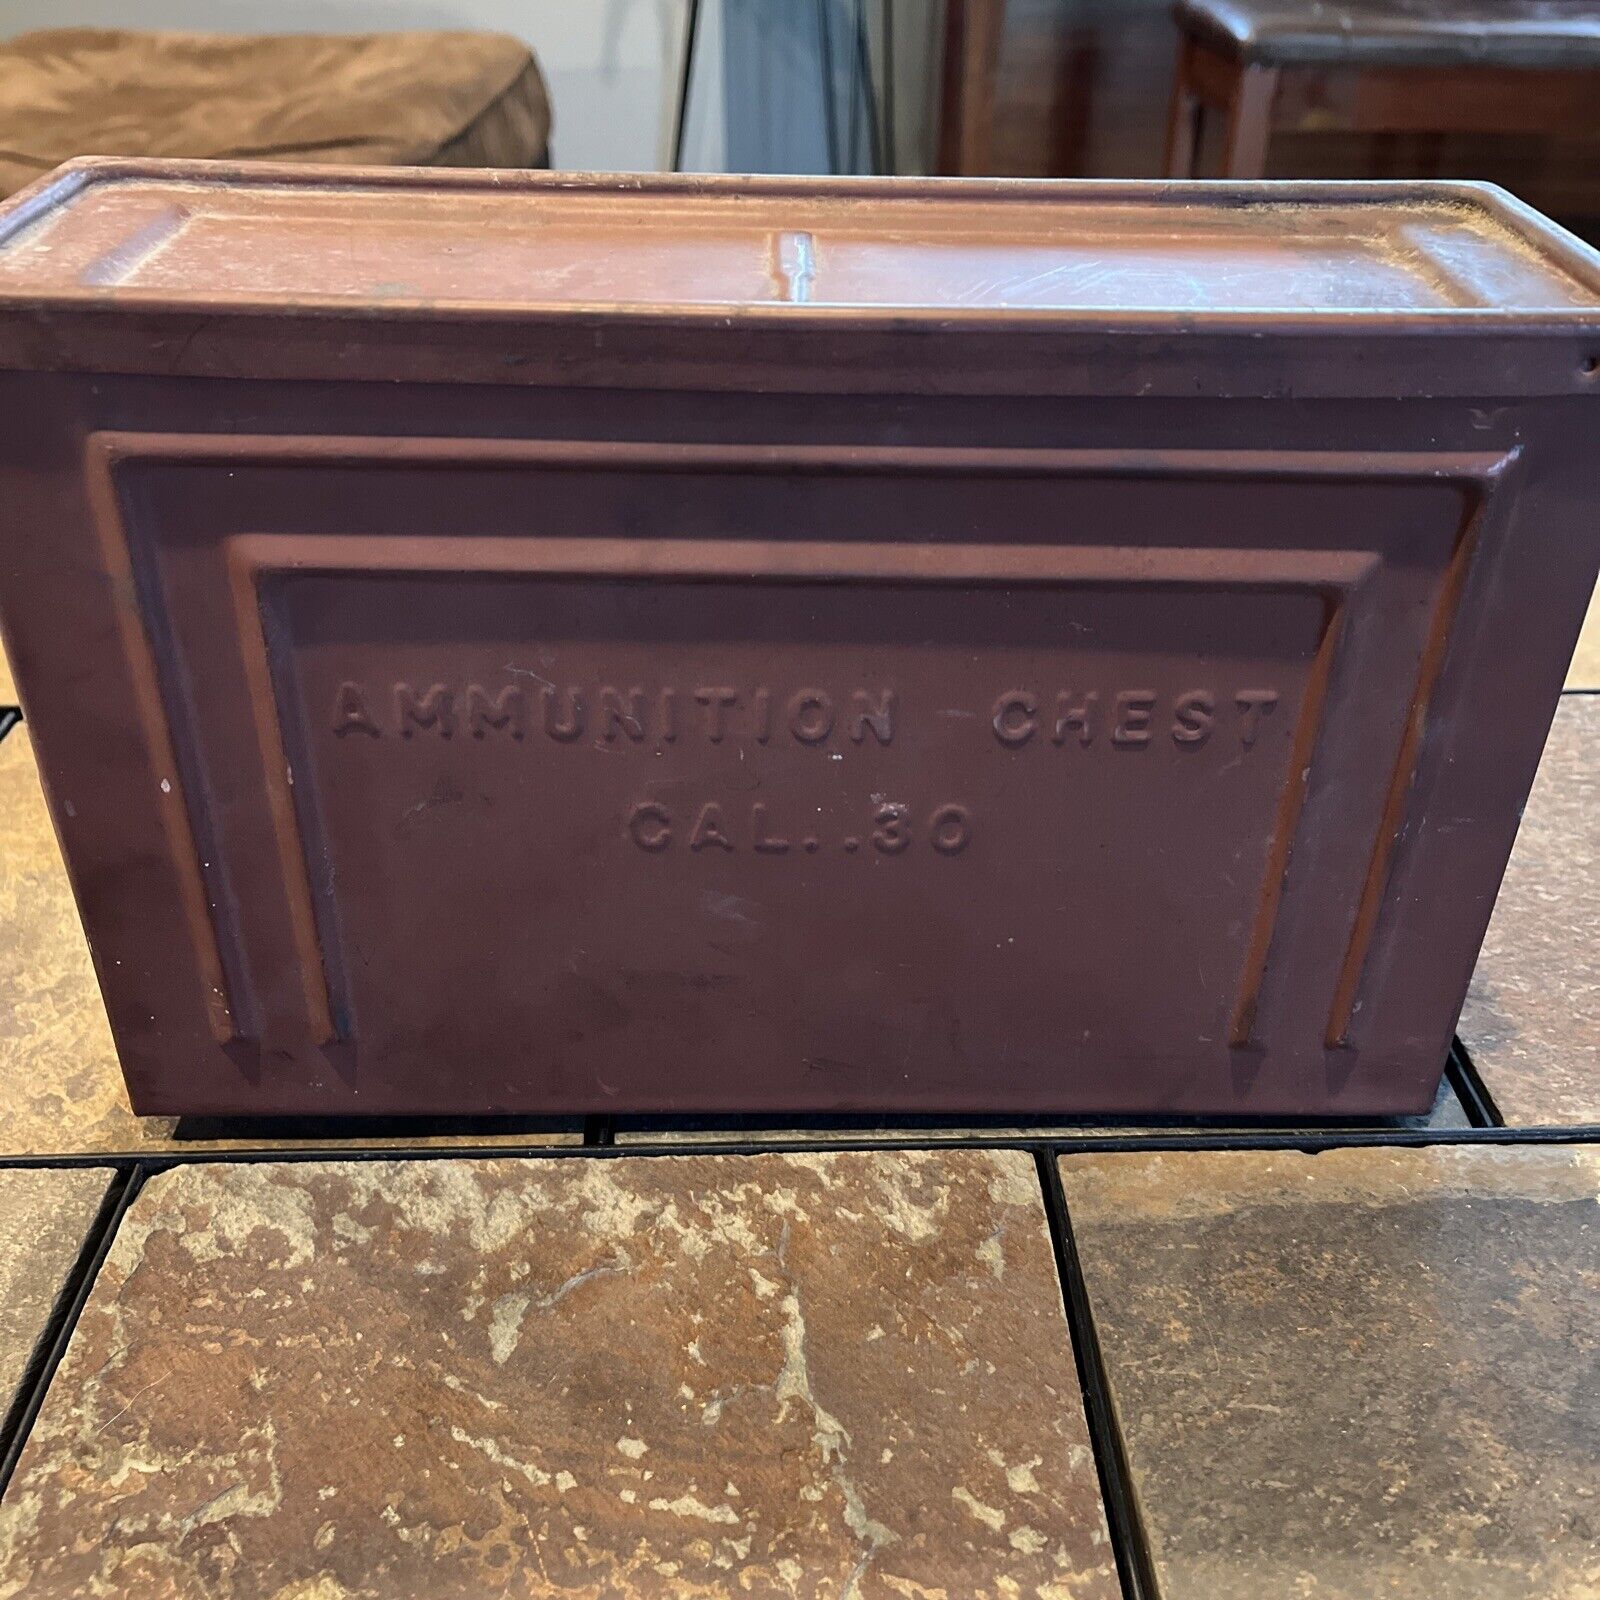 RARE Old Vintage WWII 30 Cal M1 Ammunition Ammo Box Chest US Flaming Bomb